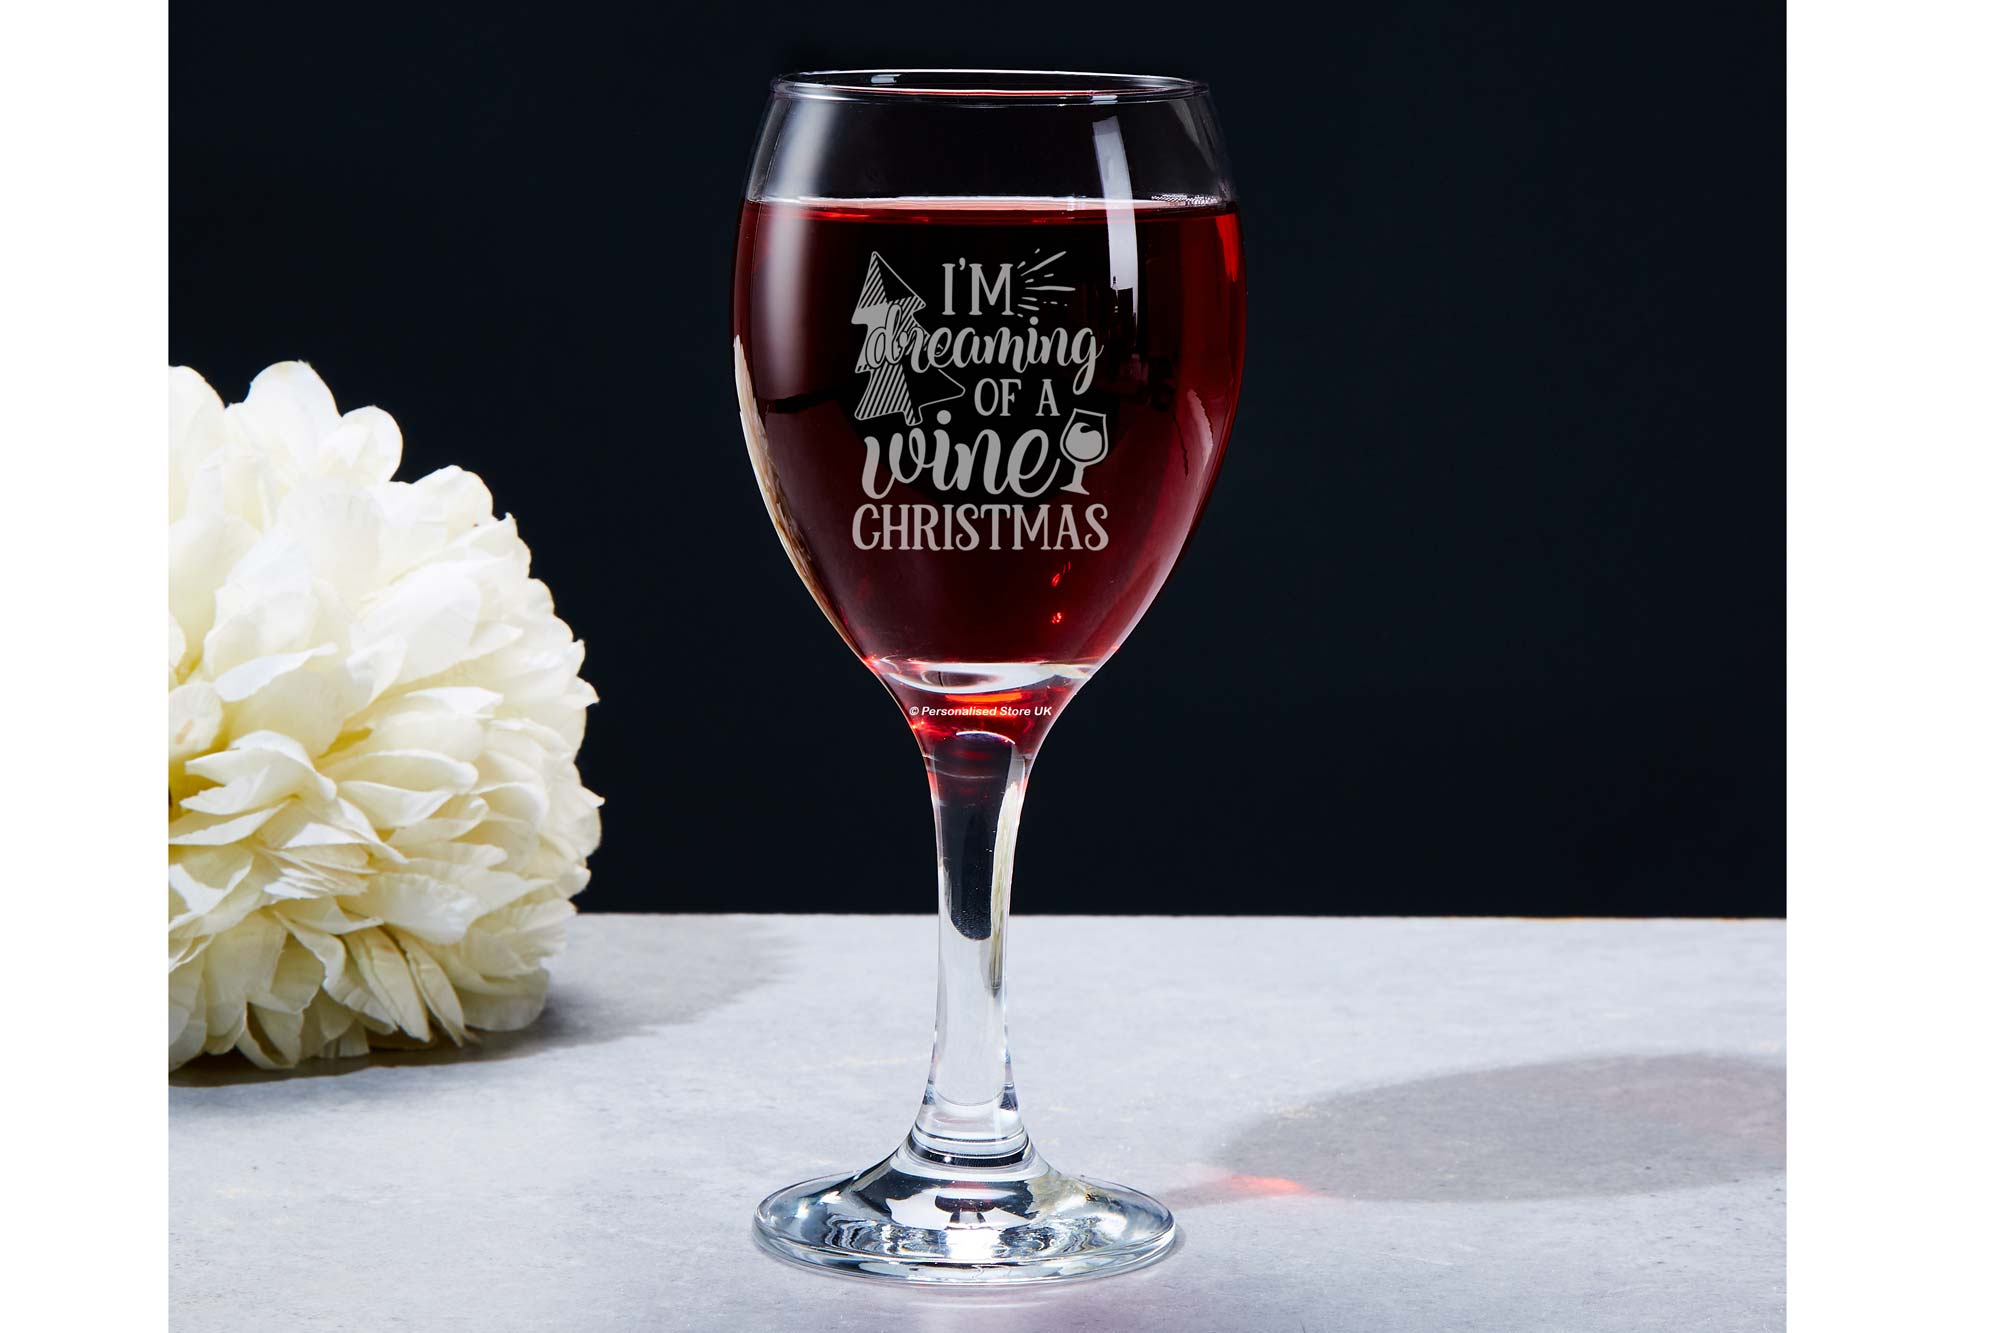 I'm Dreaming of a Wine Christmas High Quality Wine Glass. Engraved wine glass for professional Use. Made and shipped from the UK.